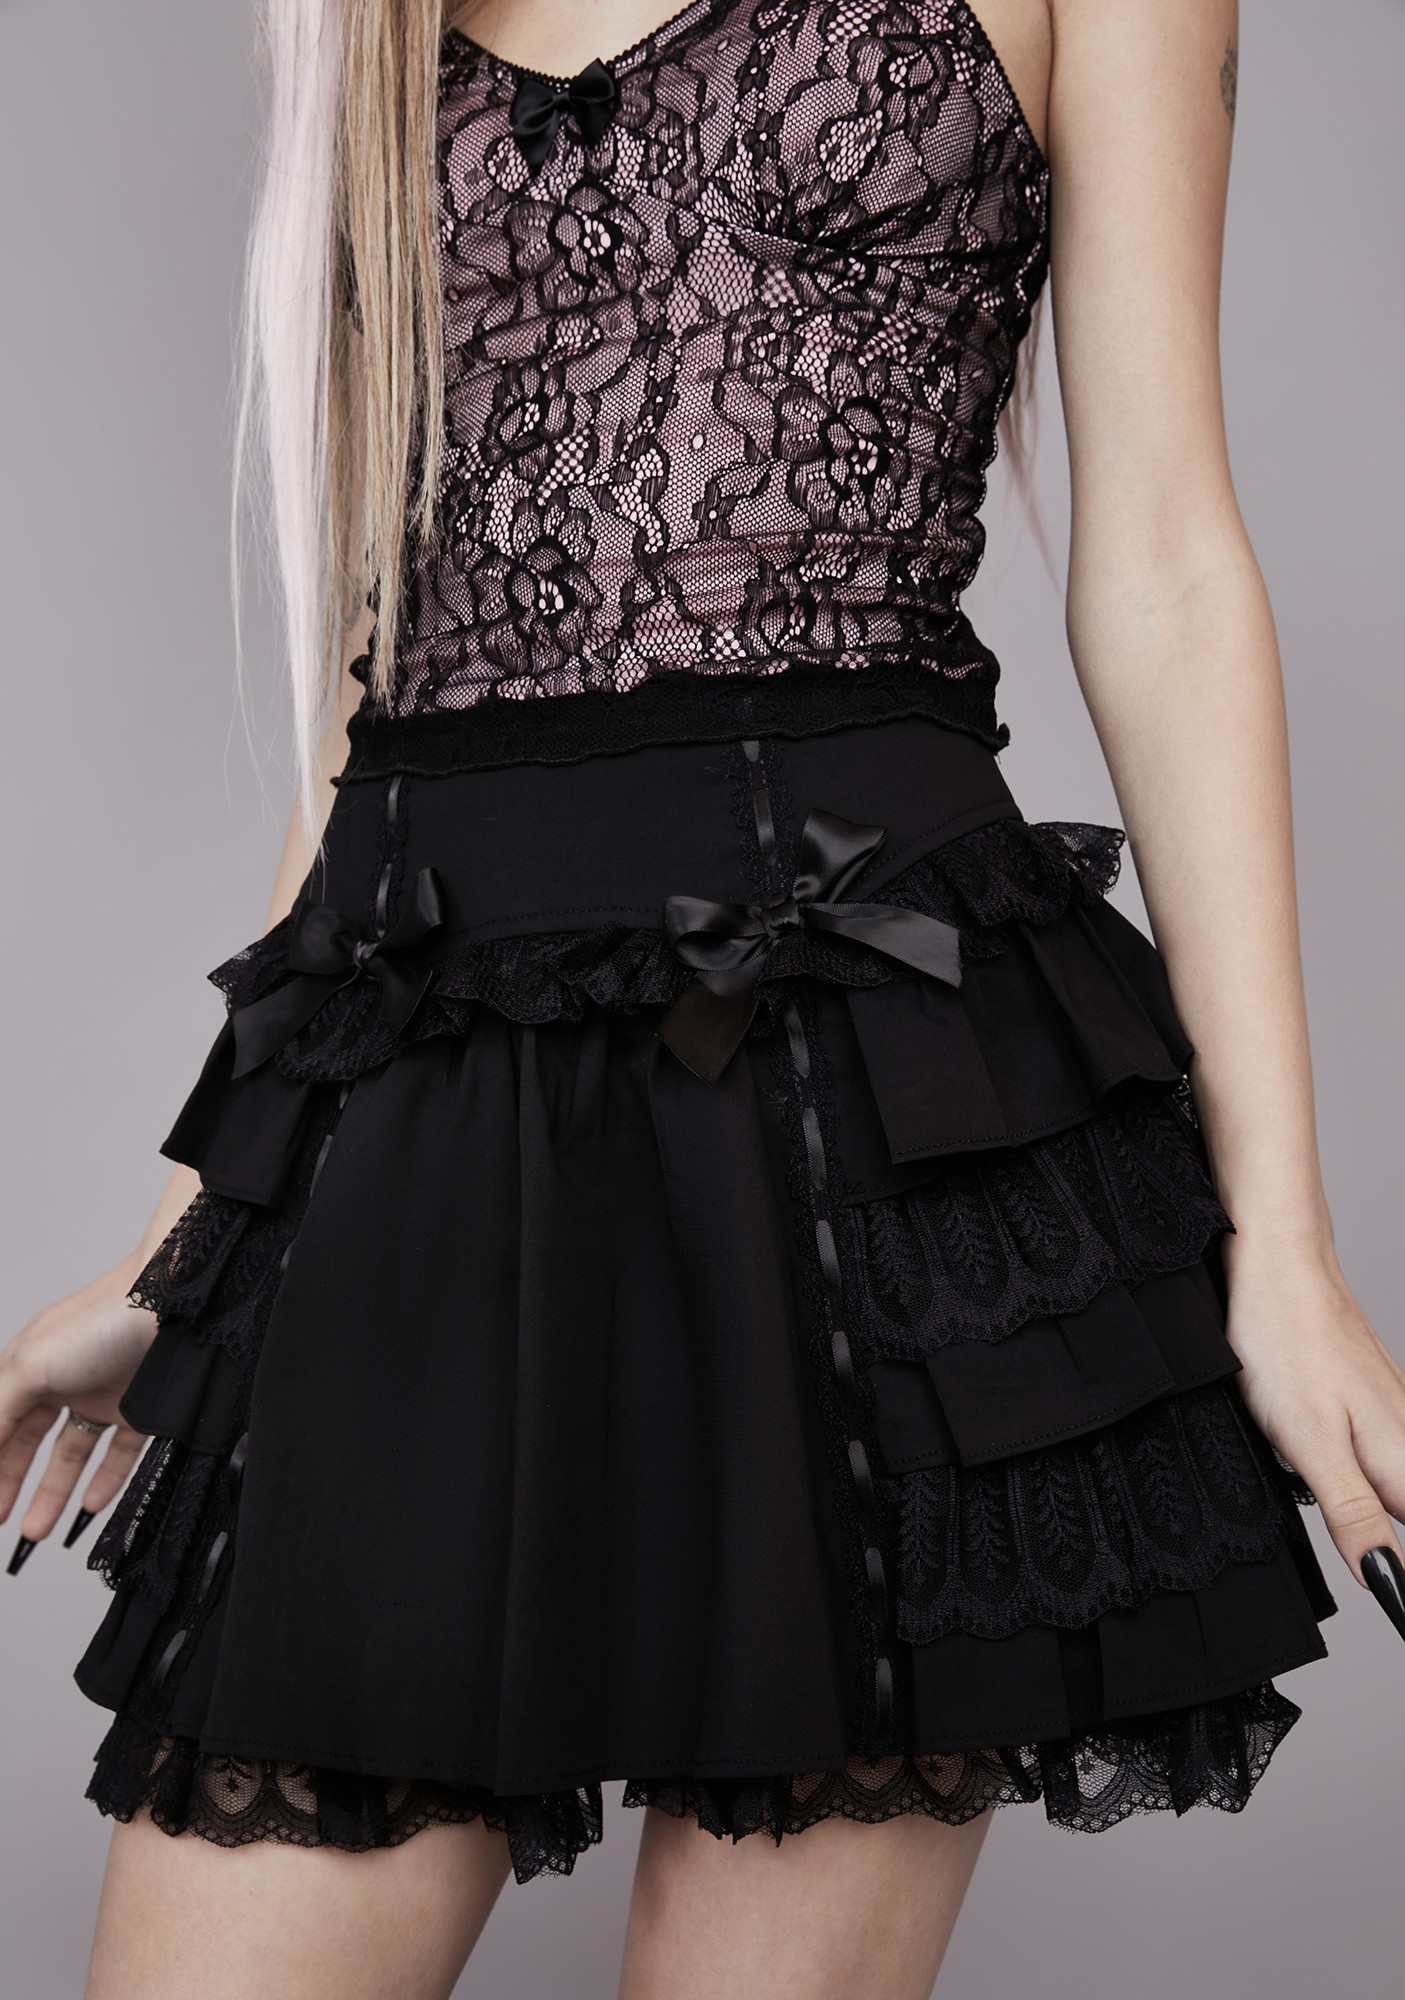 Savage Thoughts Tiered Lace Skirt